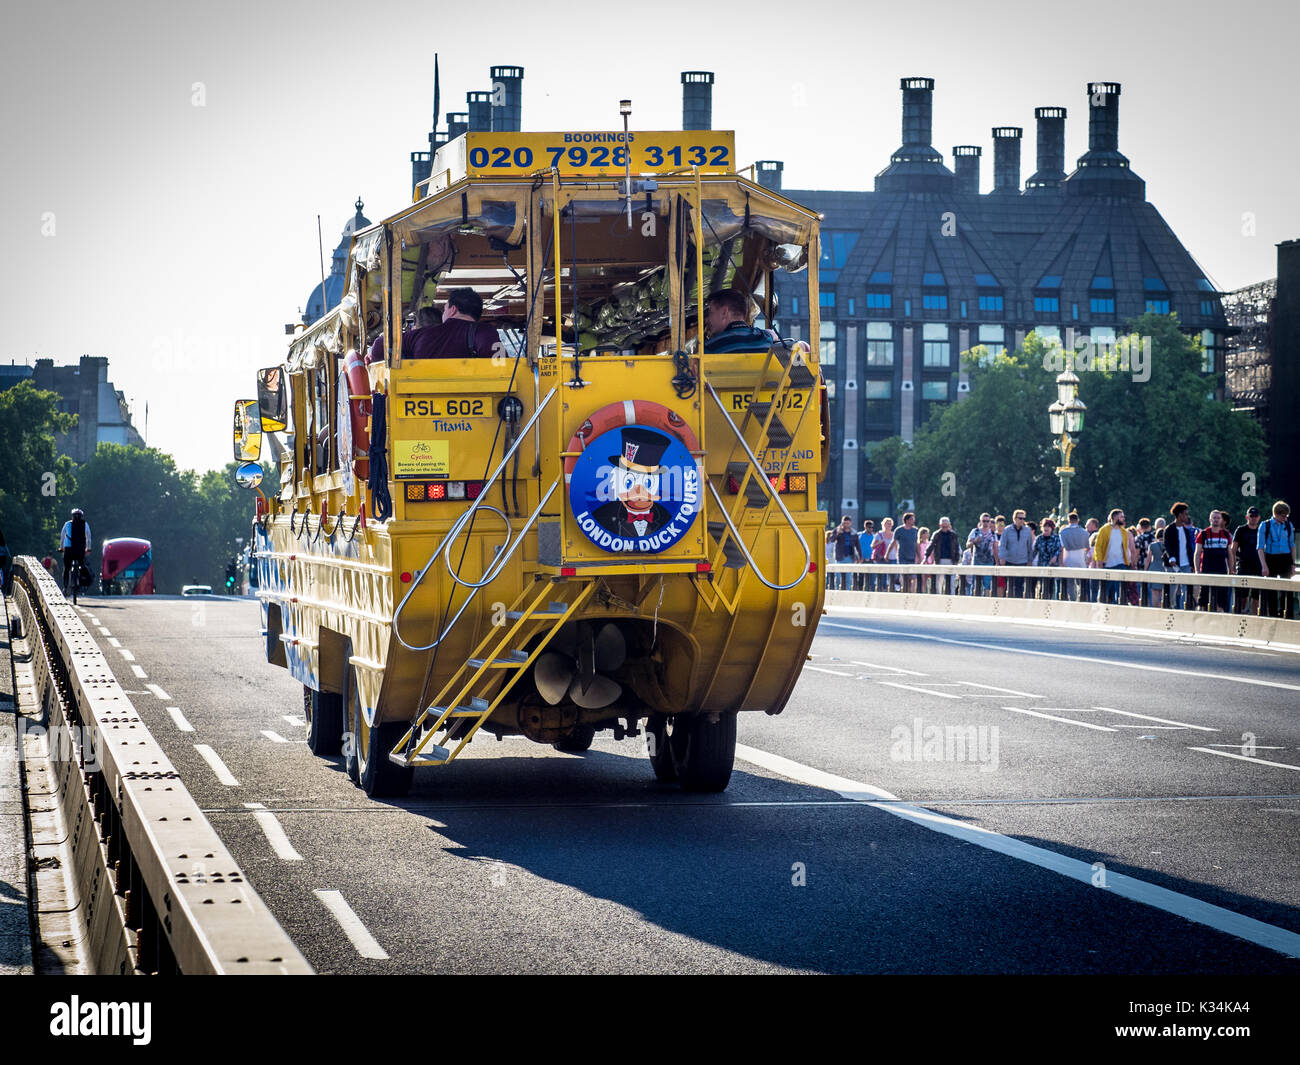 London DUKW Duck tourist transport, an amphibious bus that takes Tourists on a trip around London roads and on the RiverThames. Stock Photo